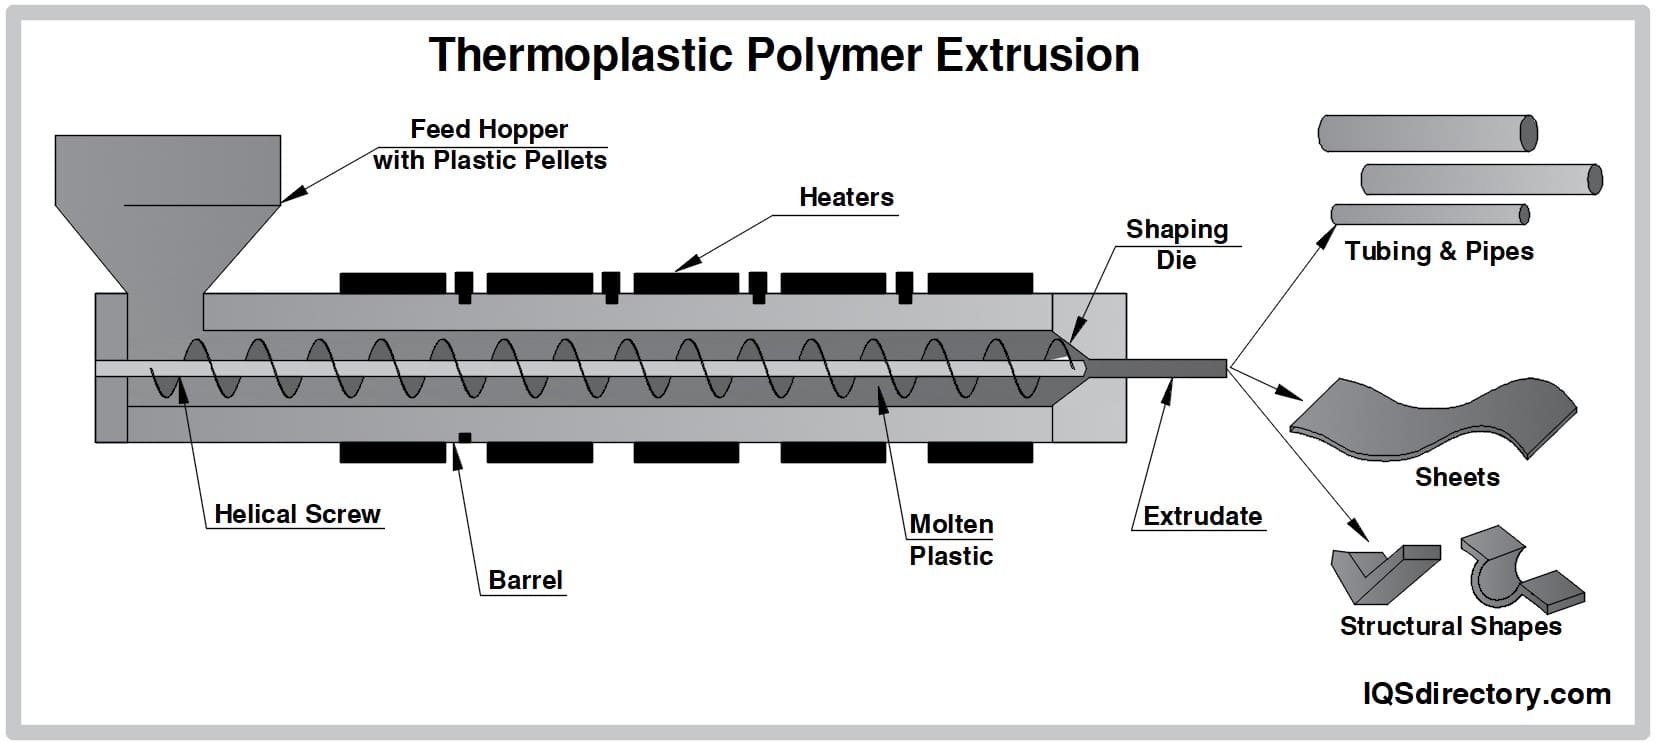 Thermoplastic Polymer Extrusion